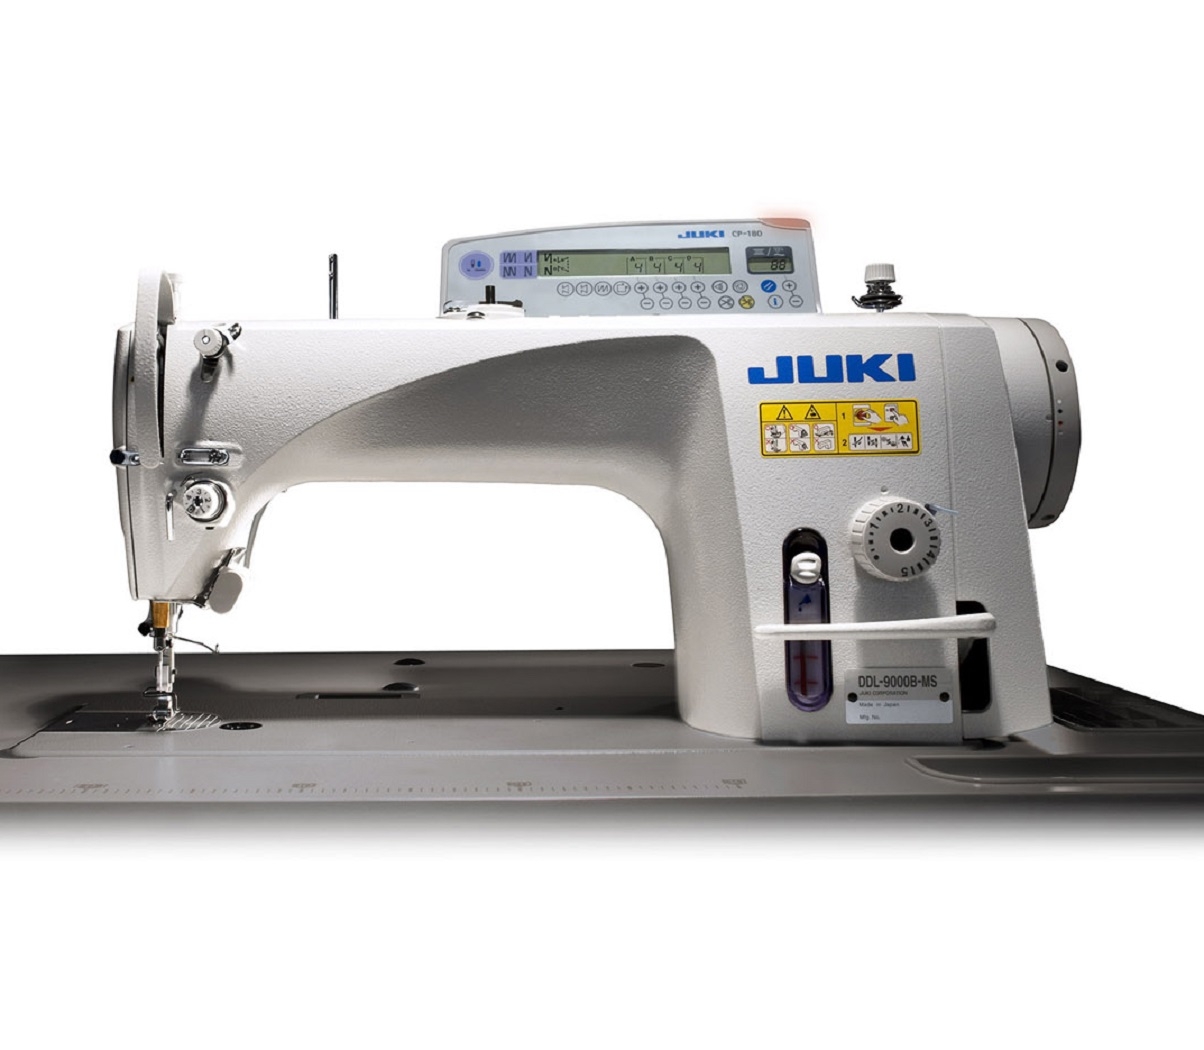 Best Sewing Machine For Advanced Sewers 2020